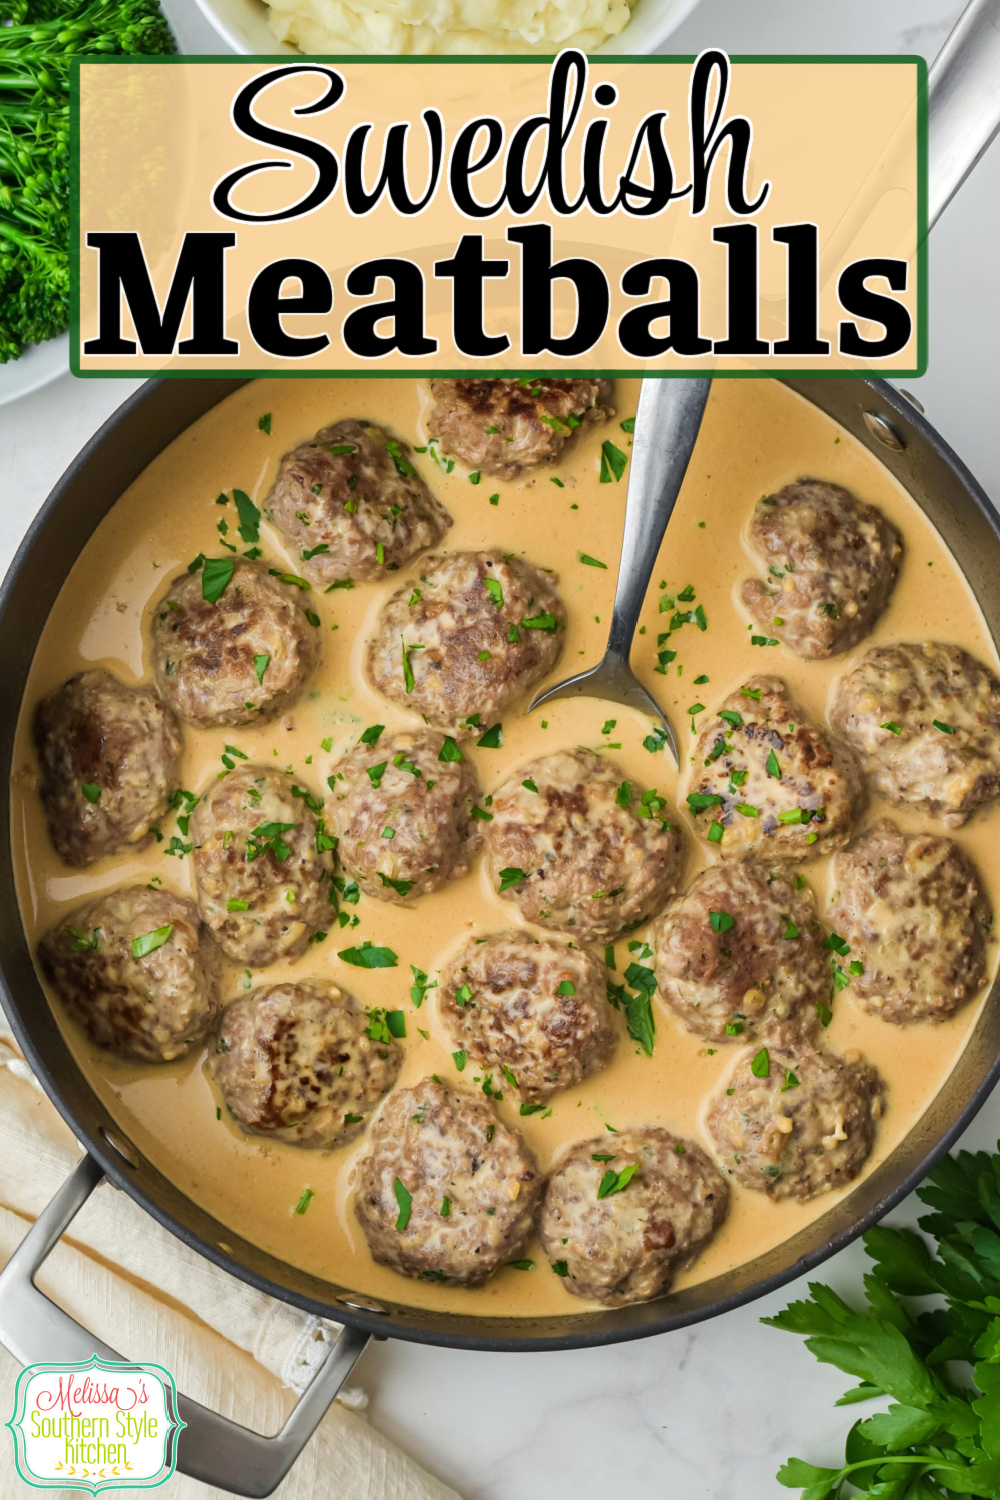 This Swedish Meatballs recipe is full flavored and versatile. It can be served both as an entrée or an appetizer for your small bites menu. #swedishmeatballs #howdoyoumakemeatballs #easymeatballsrecipes #meatballs #swedishfood #turkishmeatballs #meatballrecipes #bestswedishmeatballs via @melissasssk